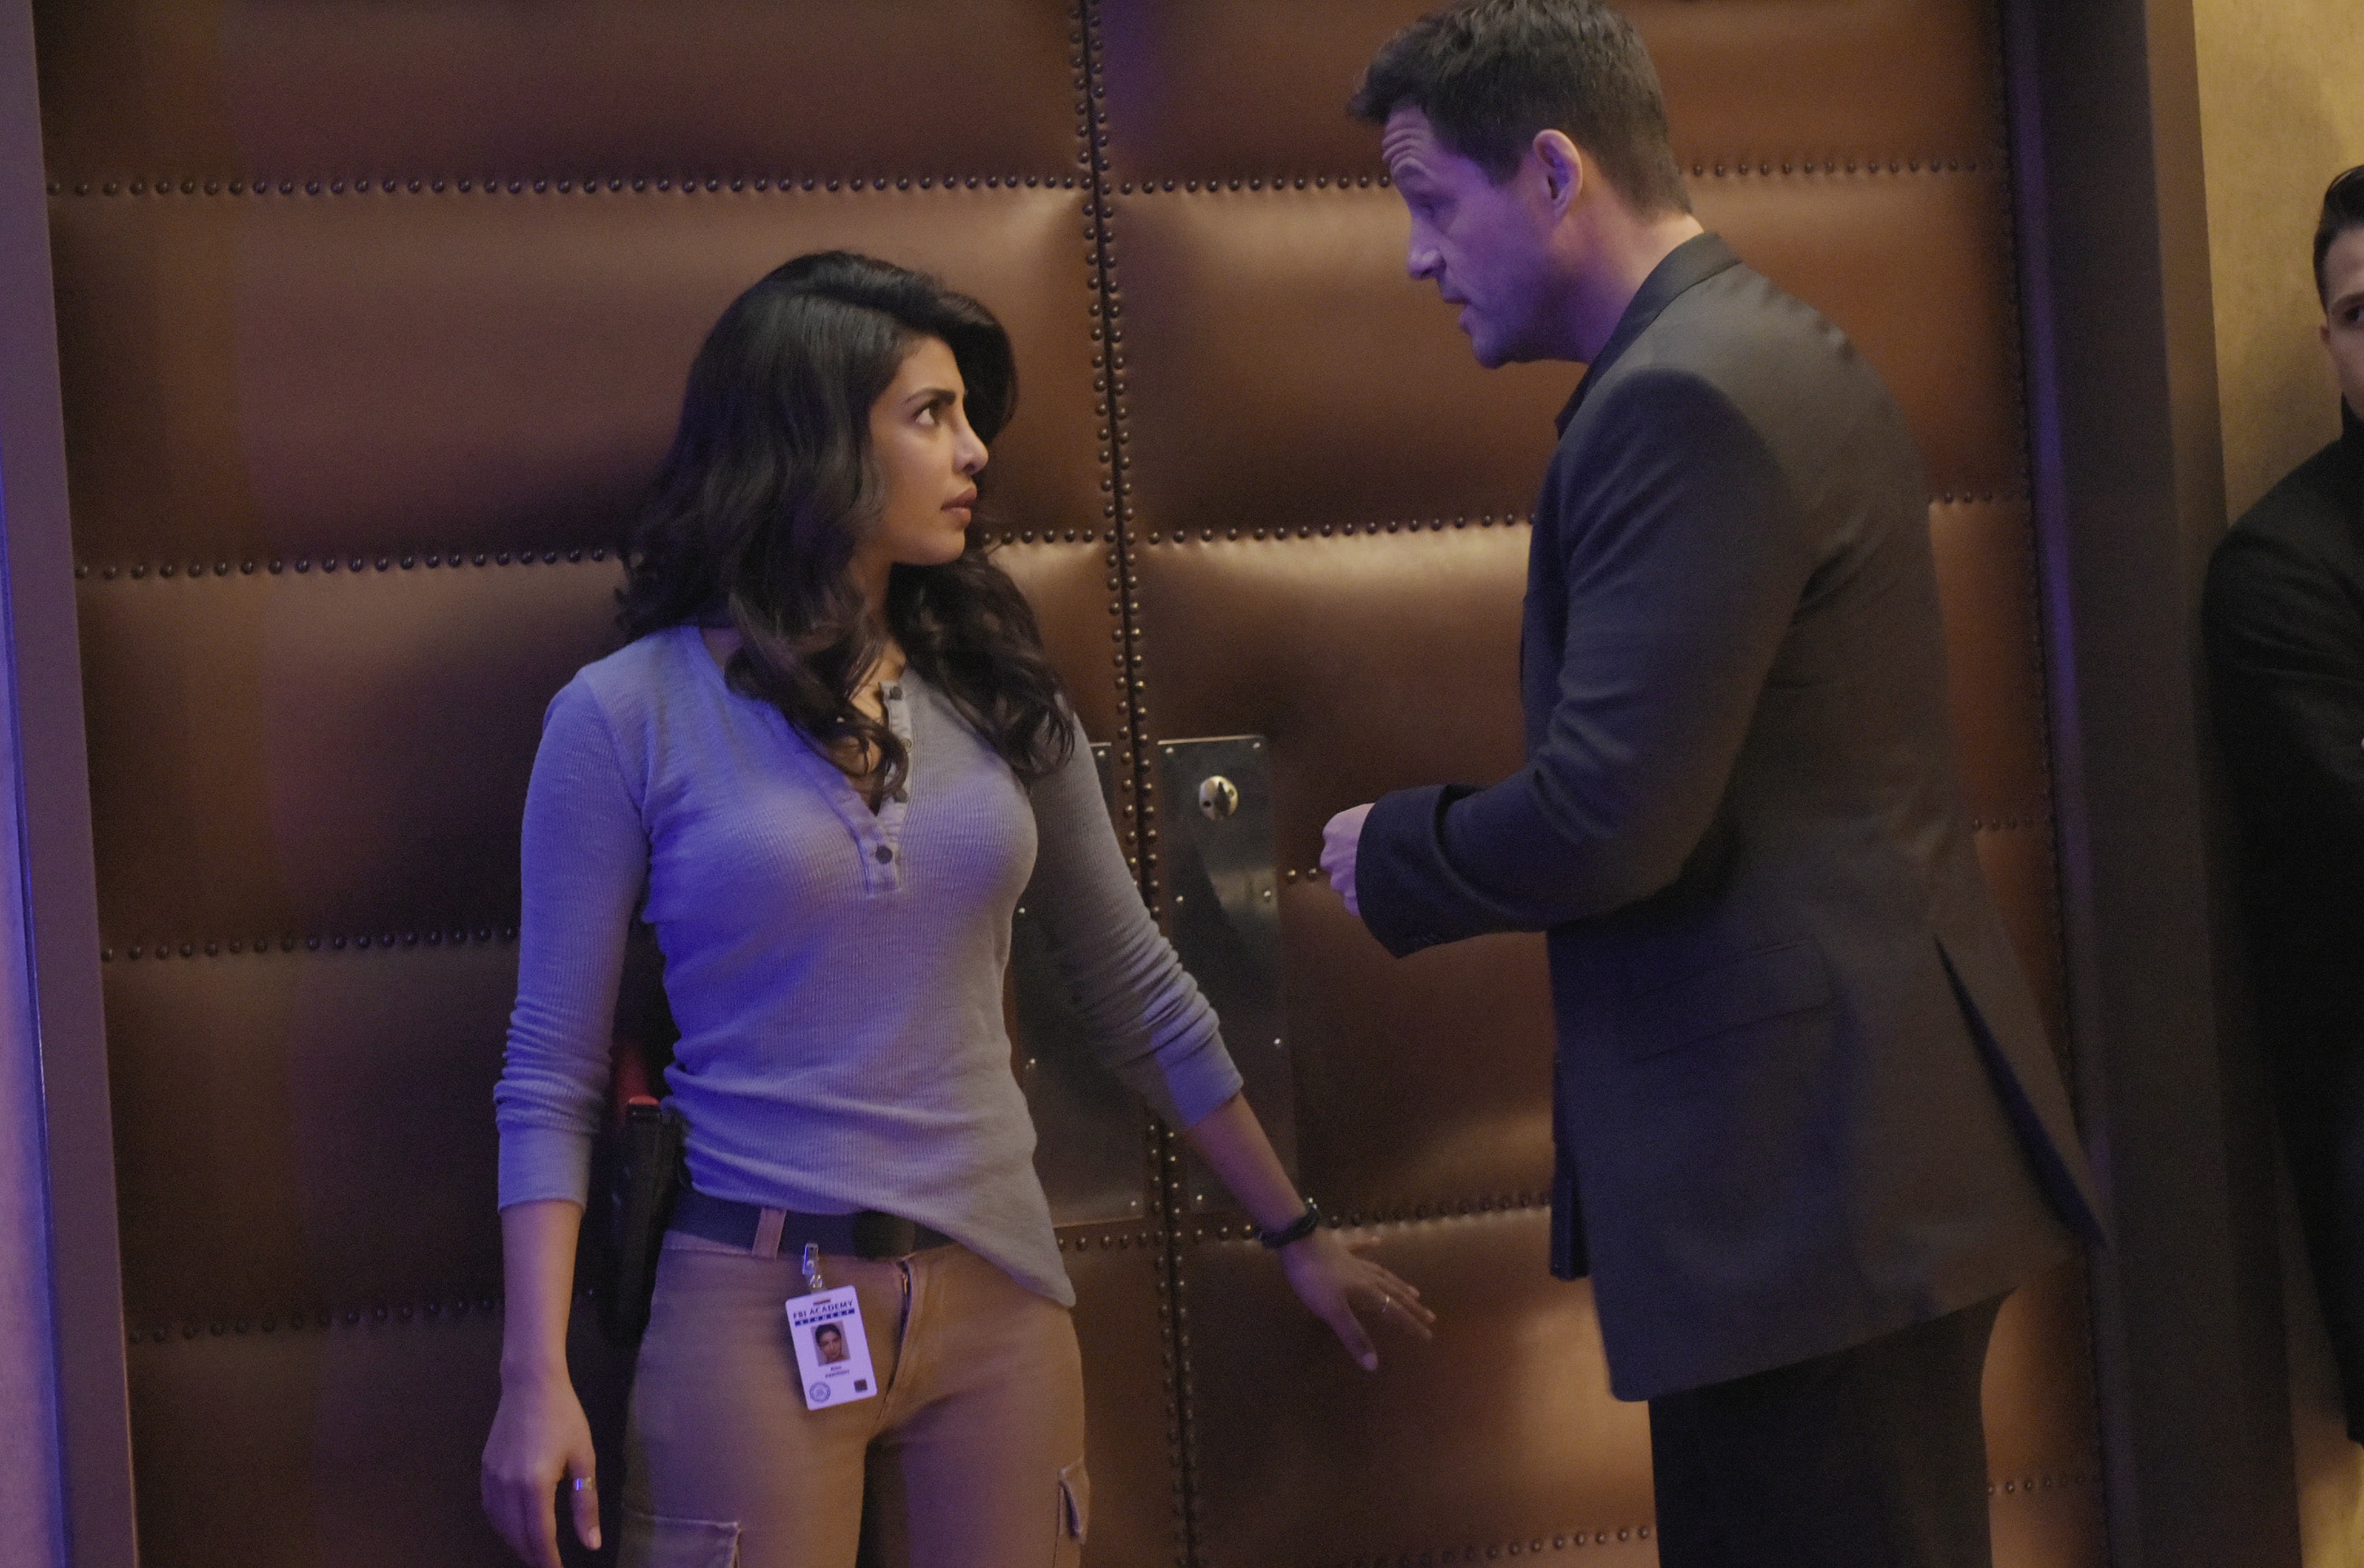 quantico, priyanka chopra, tv shows, two people, adult, young adult